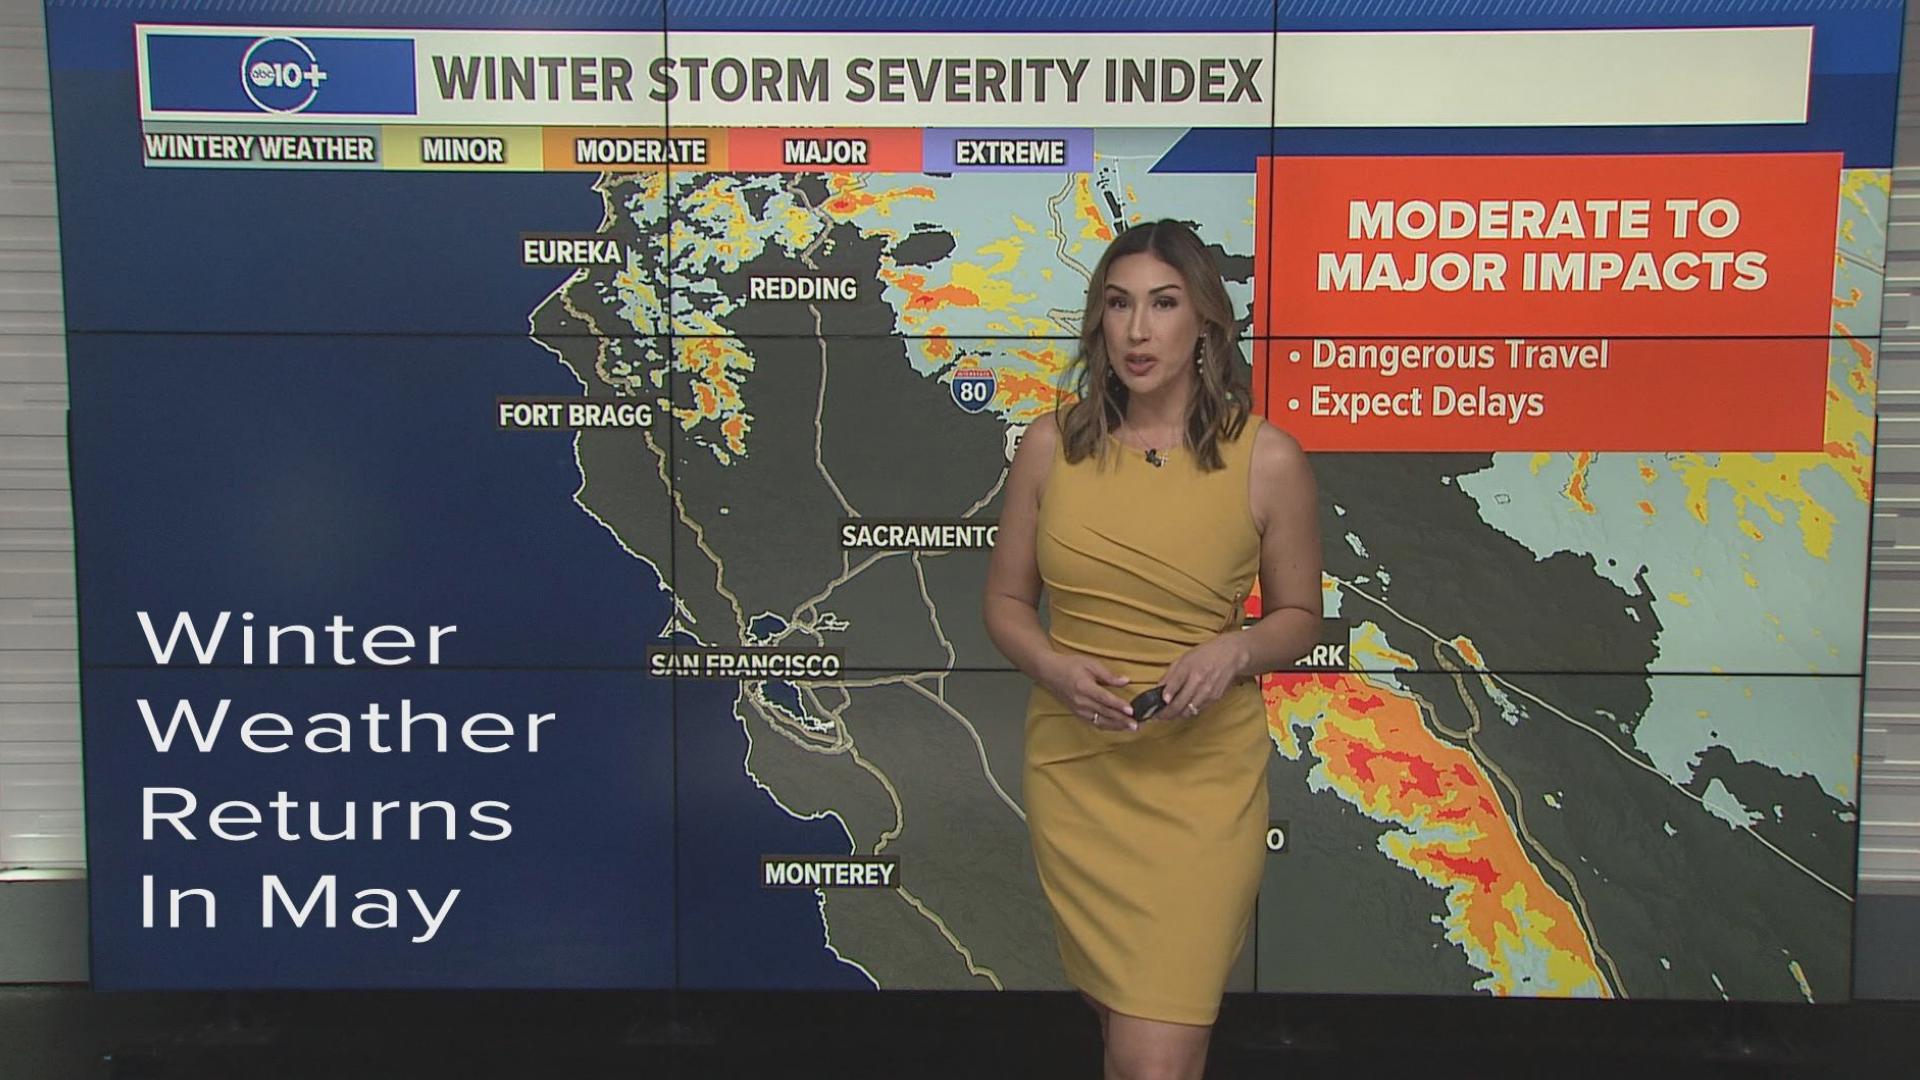 The weather change up will bring low temperatures to the northern California and snow to the Sierra Nevada.